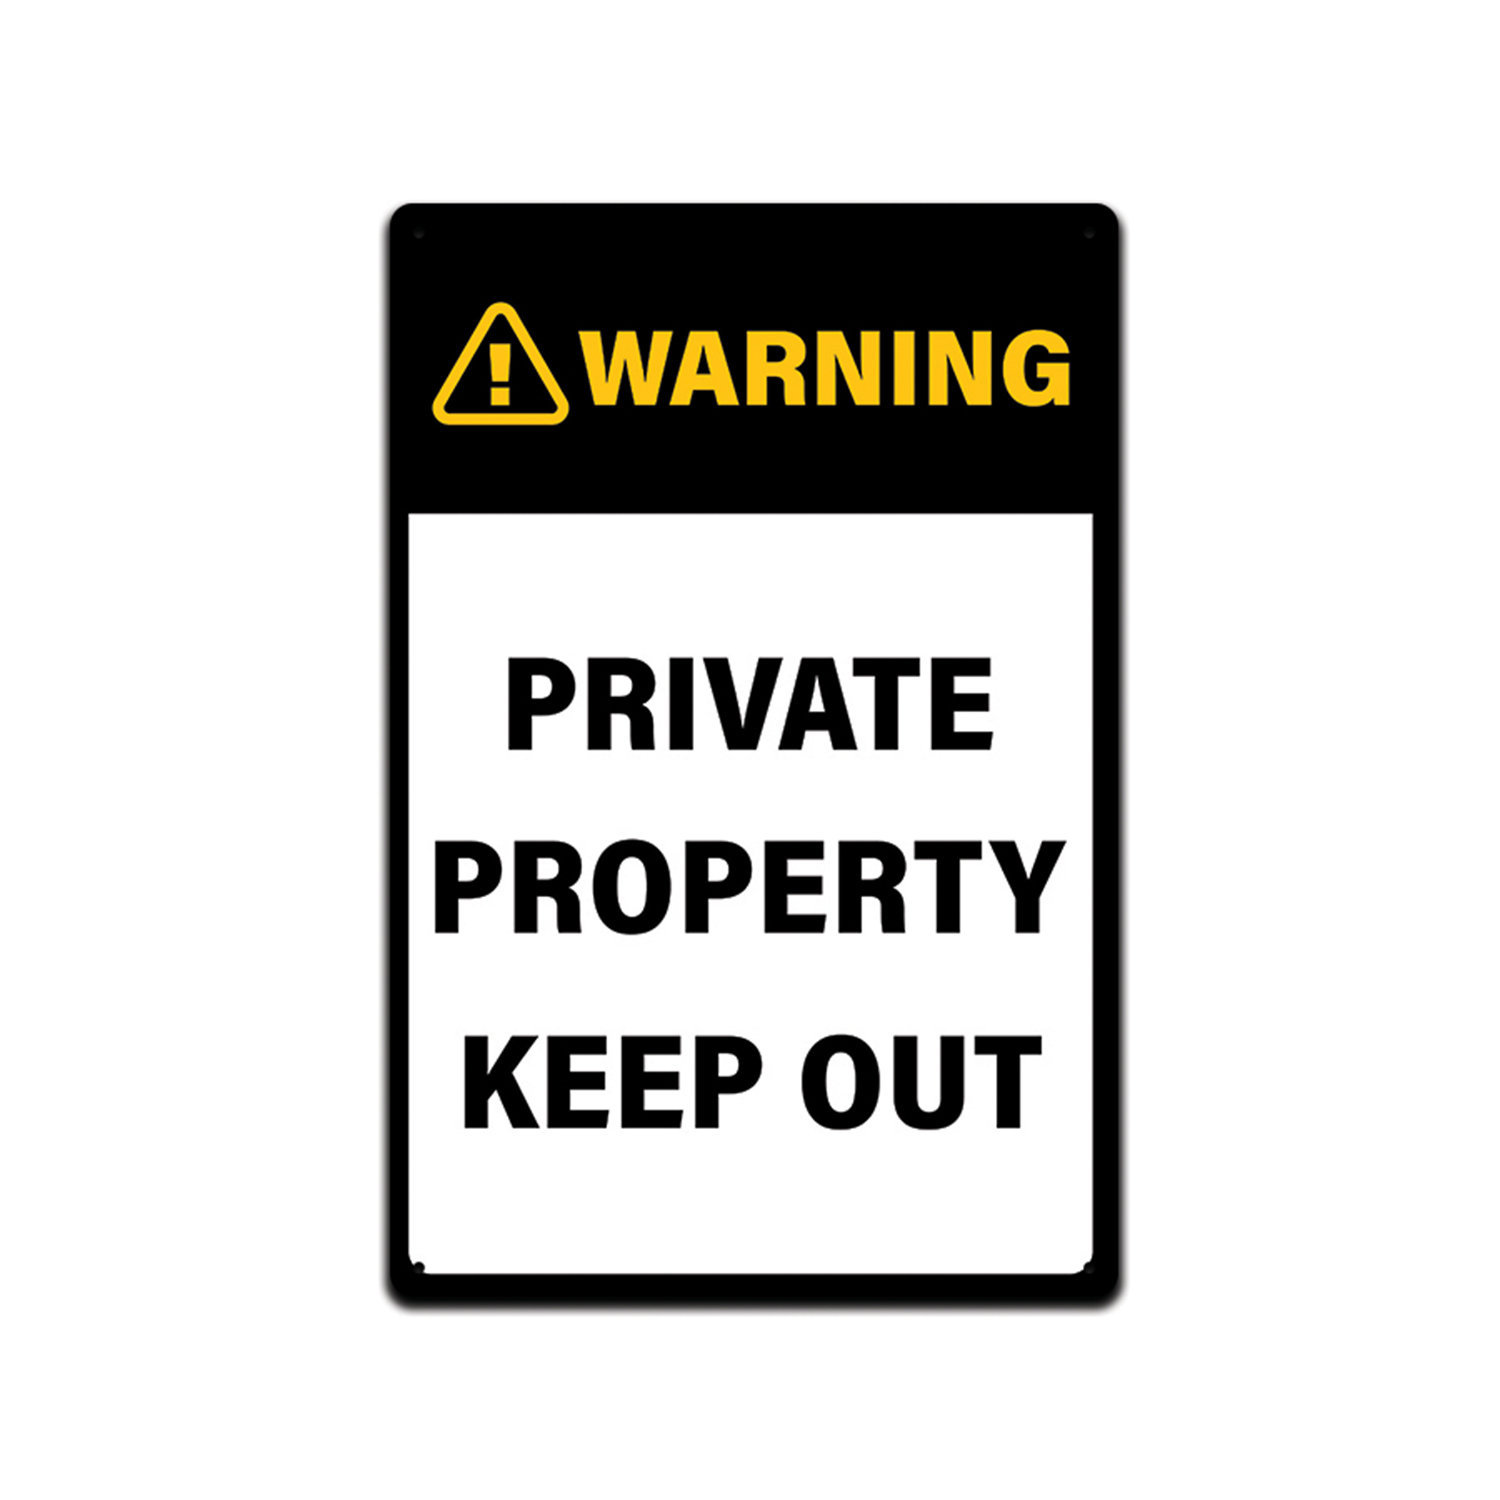 Warning Private Property Keep Out -These Signs Have A Retro, Rustic, and Vintage